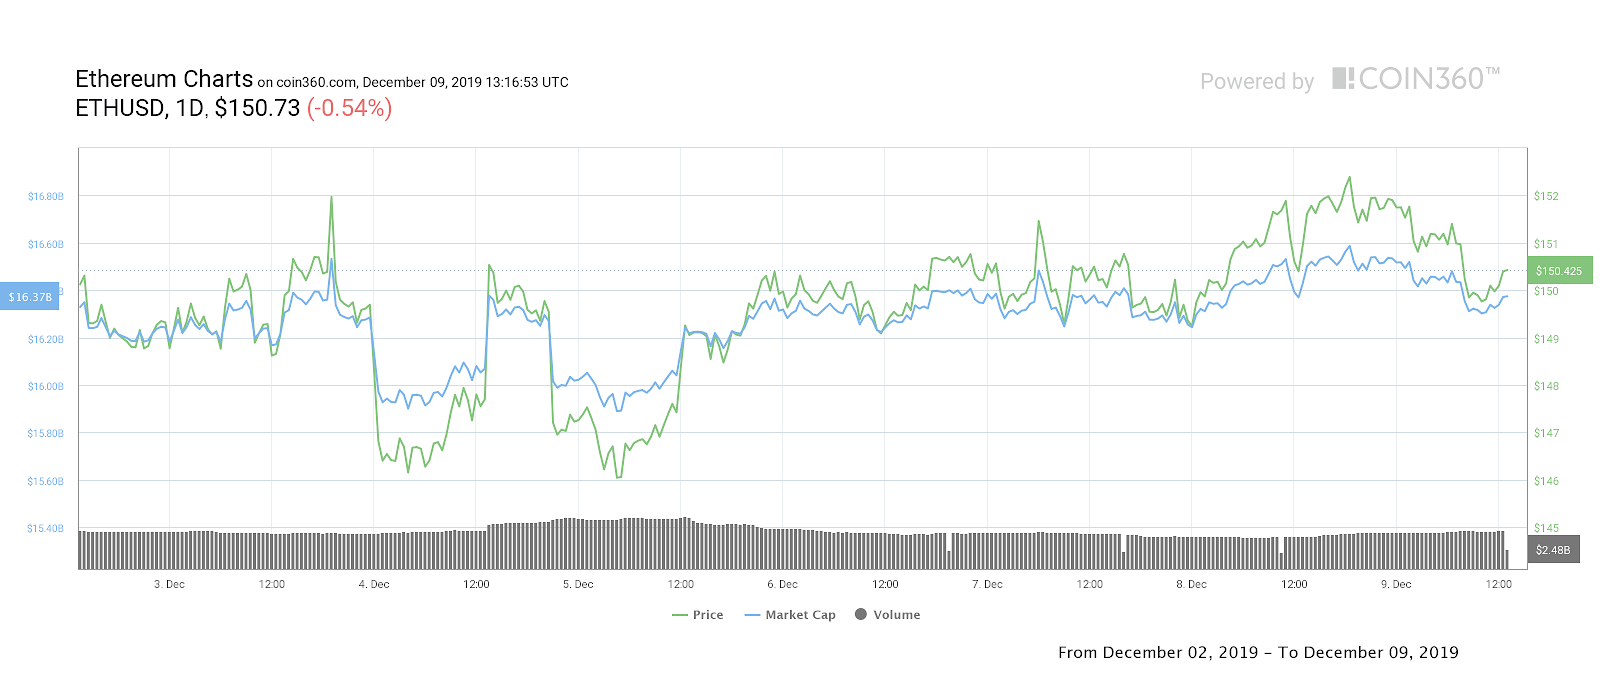 Ether seven-day price chart. Source: Coin360